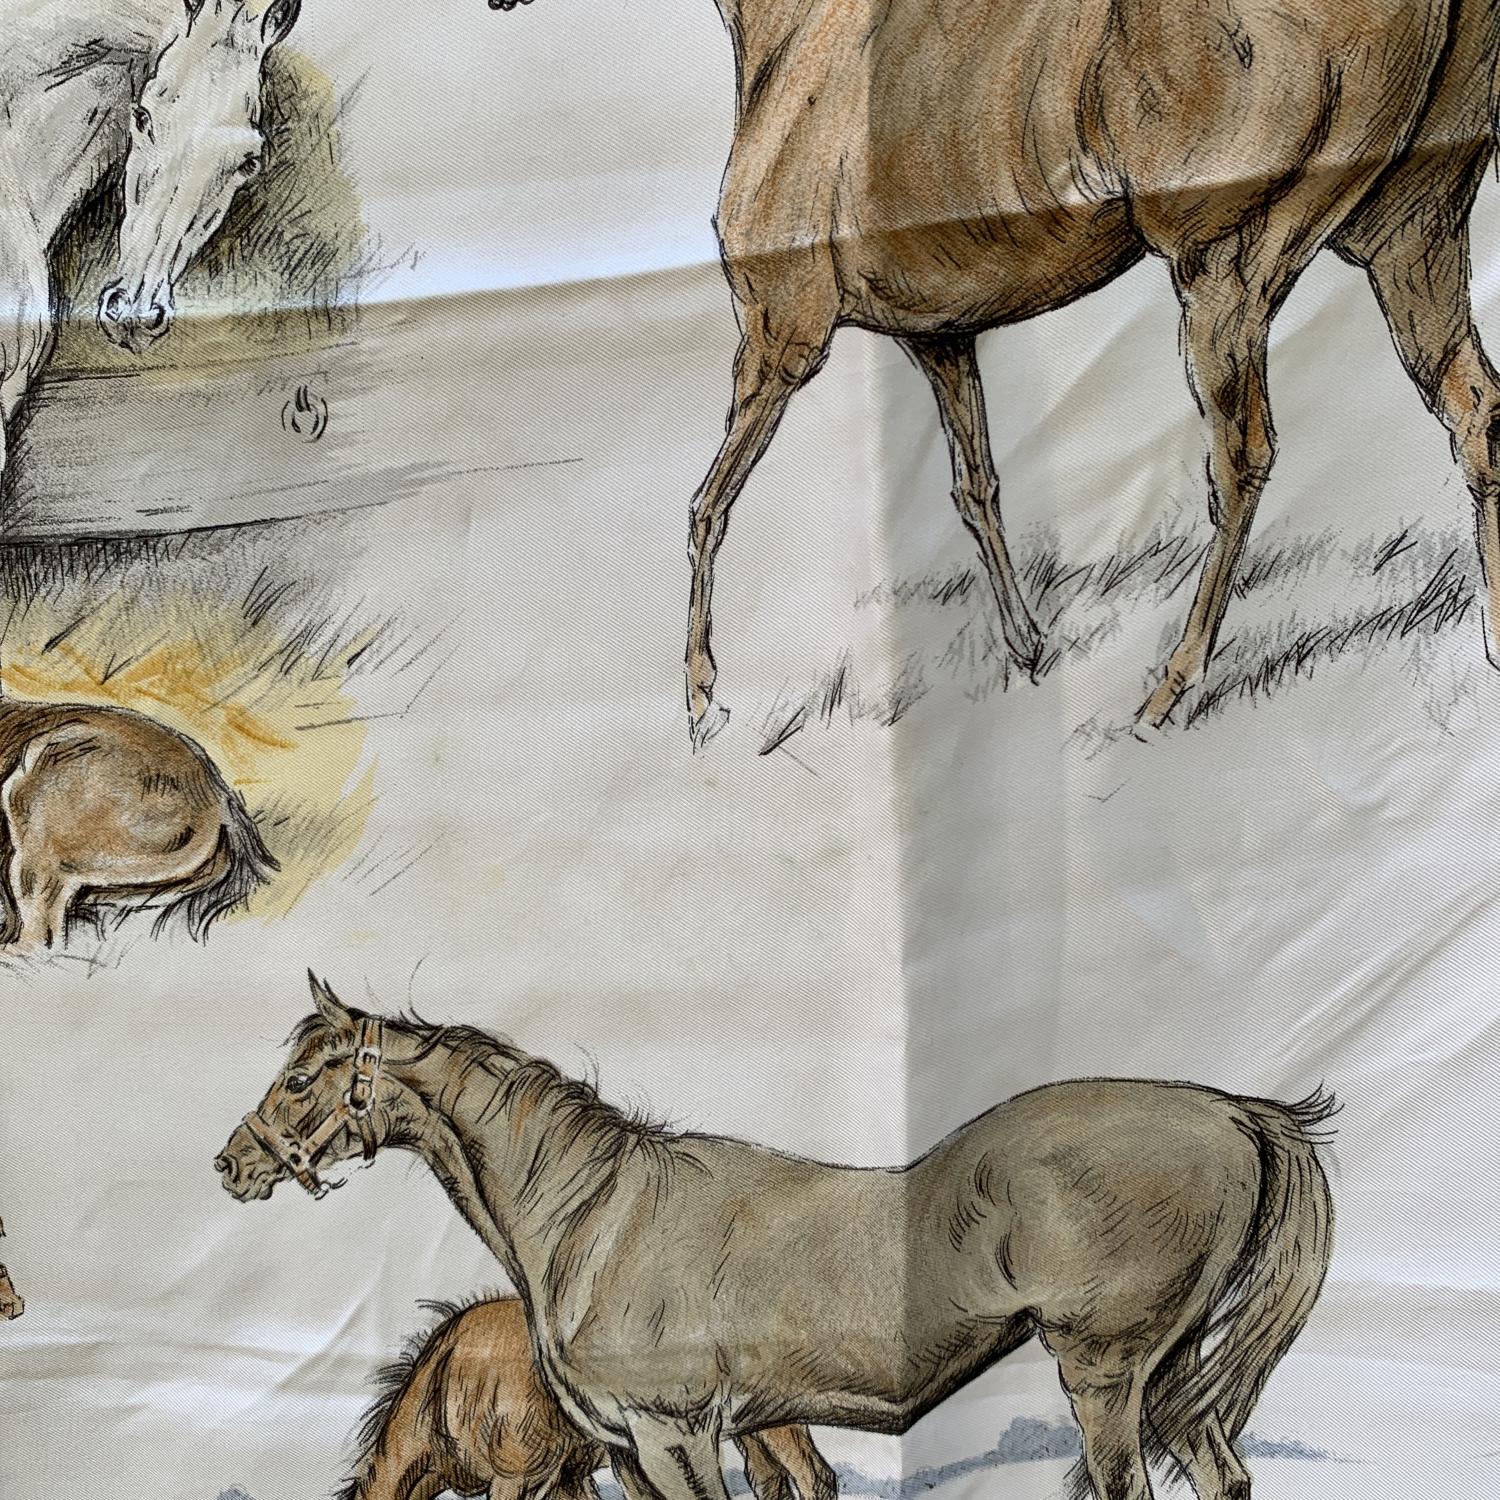 Ultra-rare vintage silk scarf designed for Hermes by Xavier de Poret. De Poret is a wildlife artist whose realistic depictions are extremely popular and sought after. This scarf was issued for the first time in 1960. This design, depicting a mare